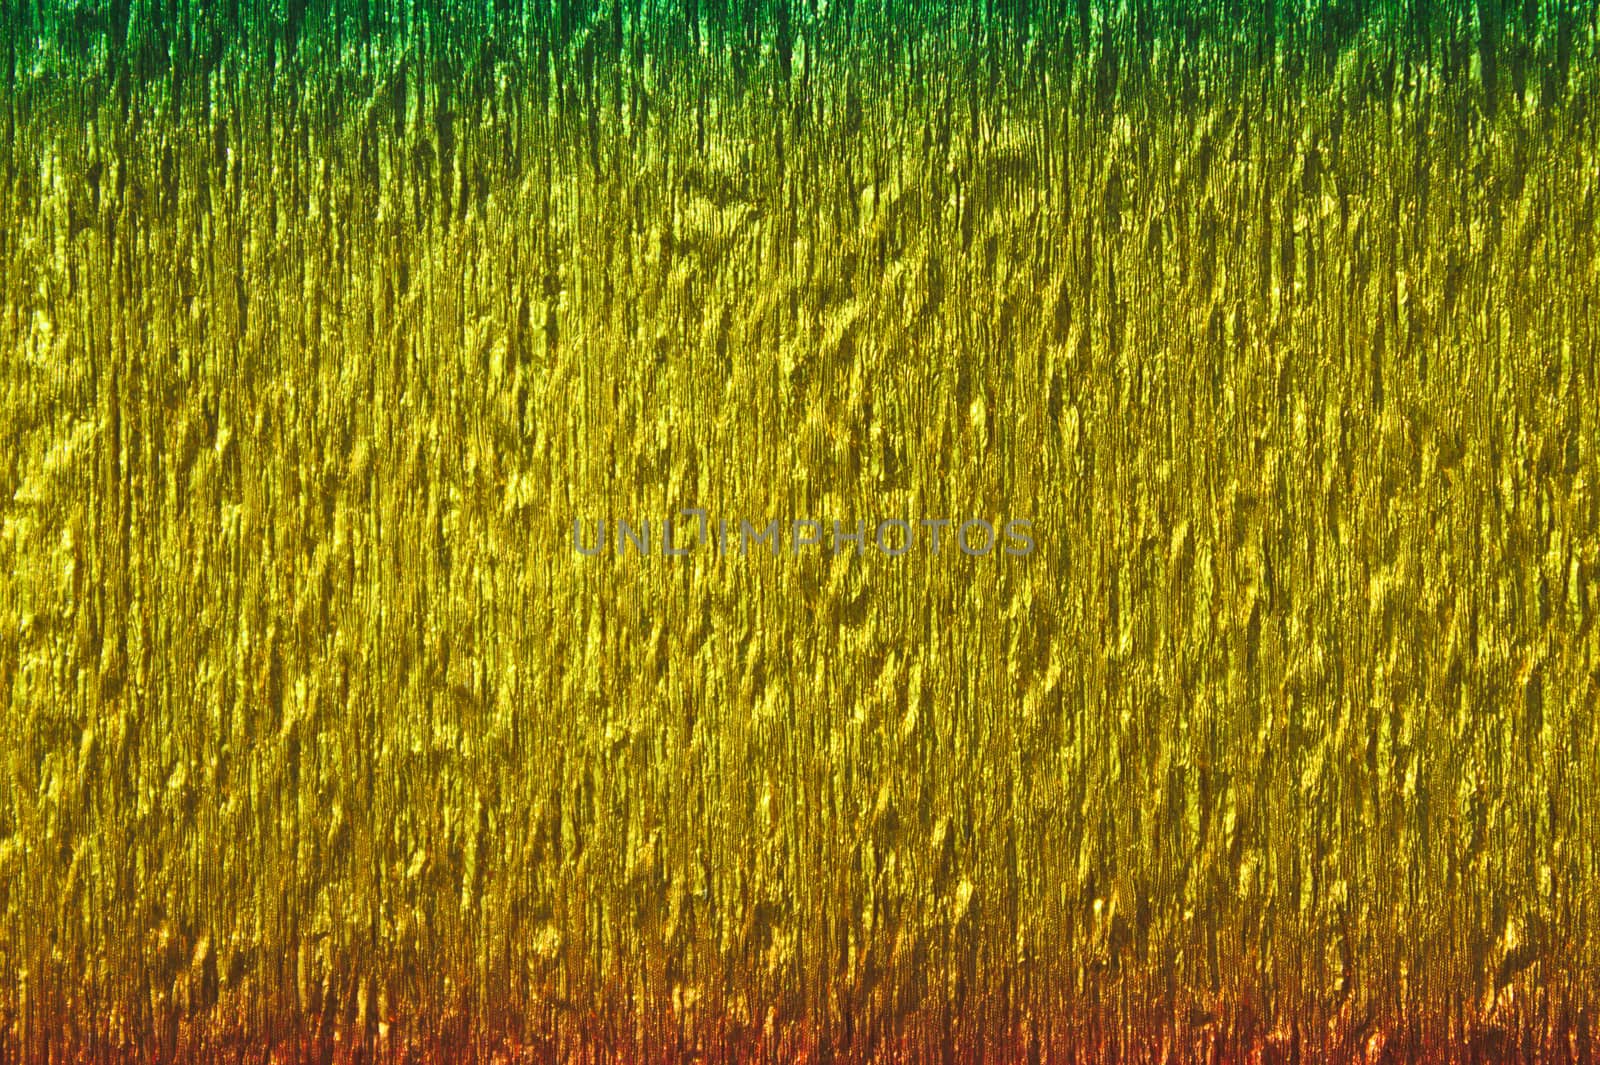 The picture shows background with colorful crepe paper